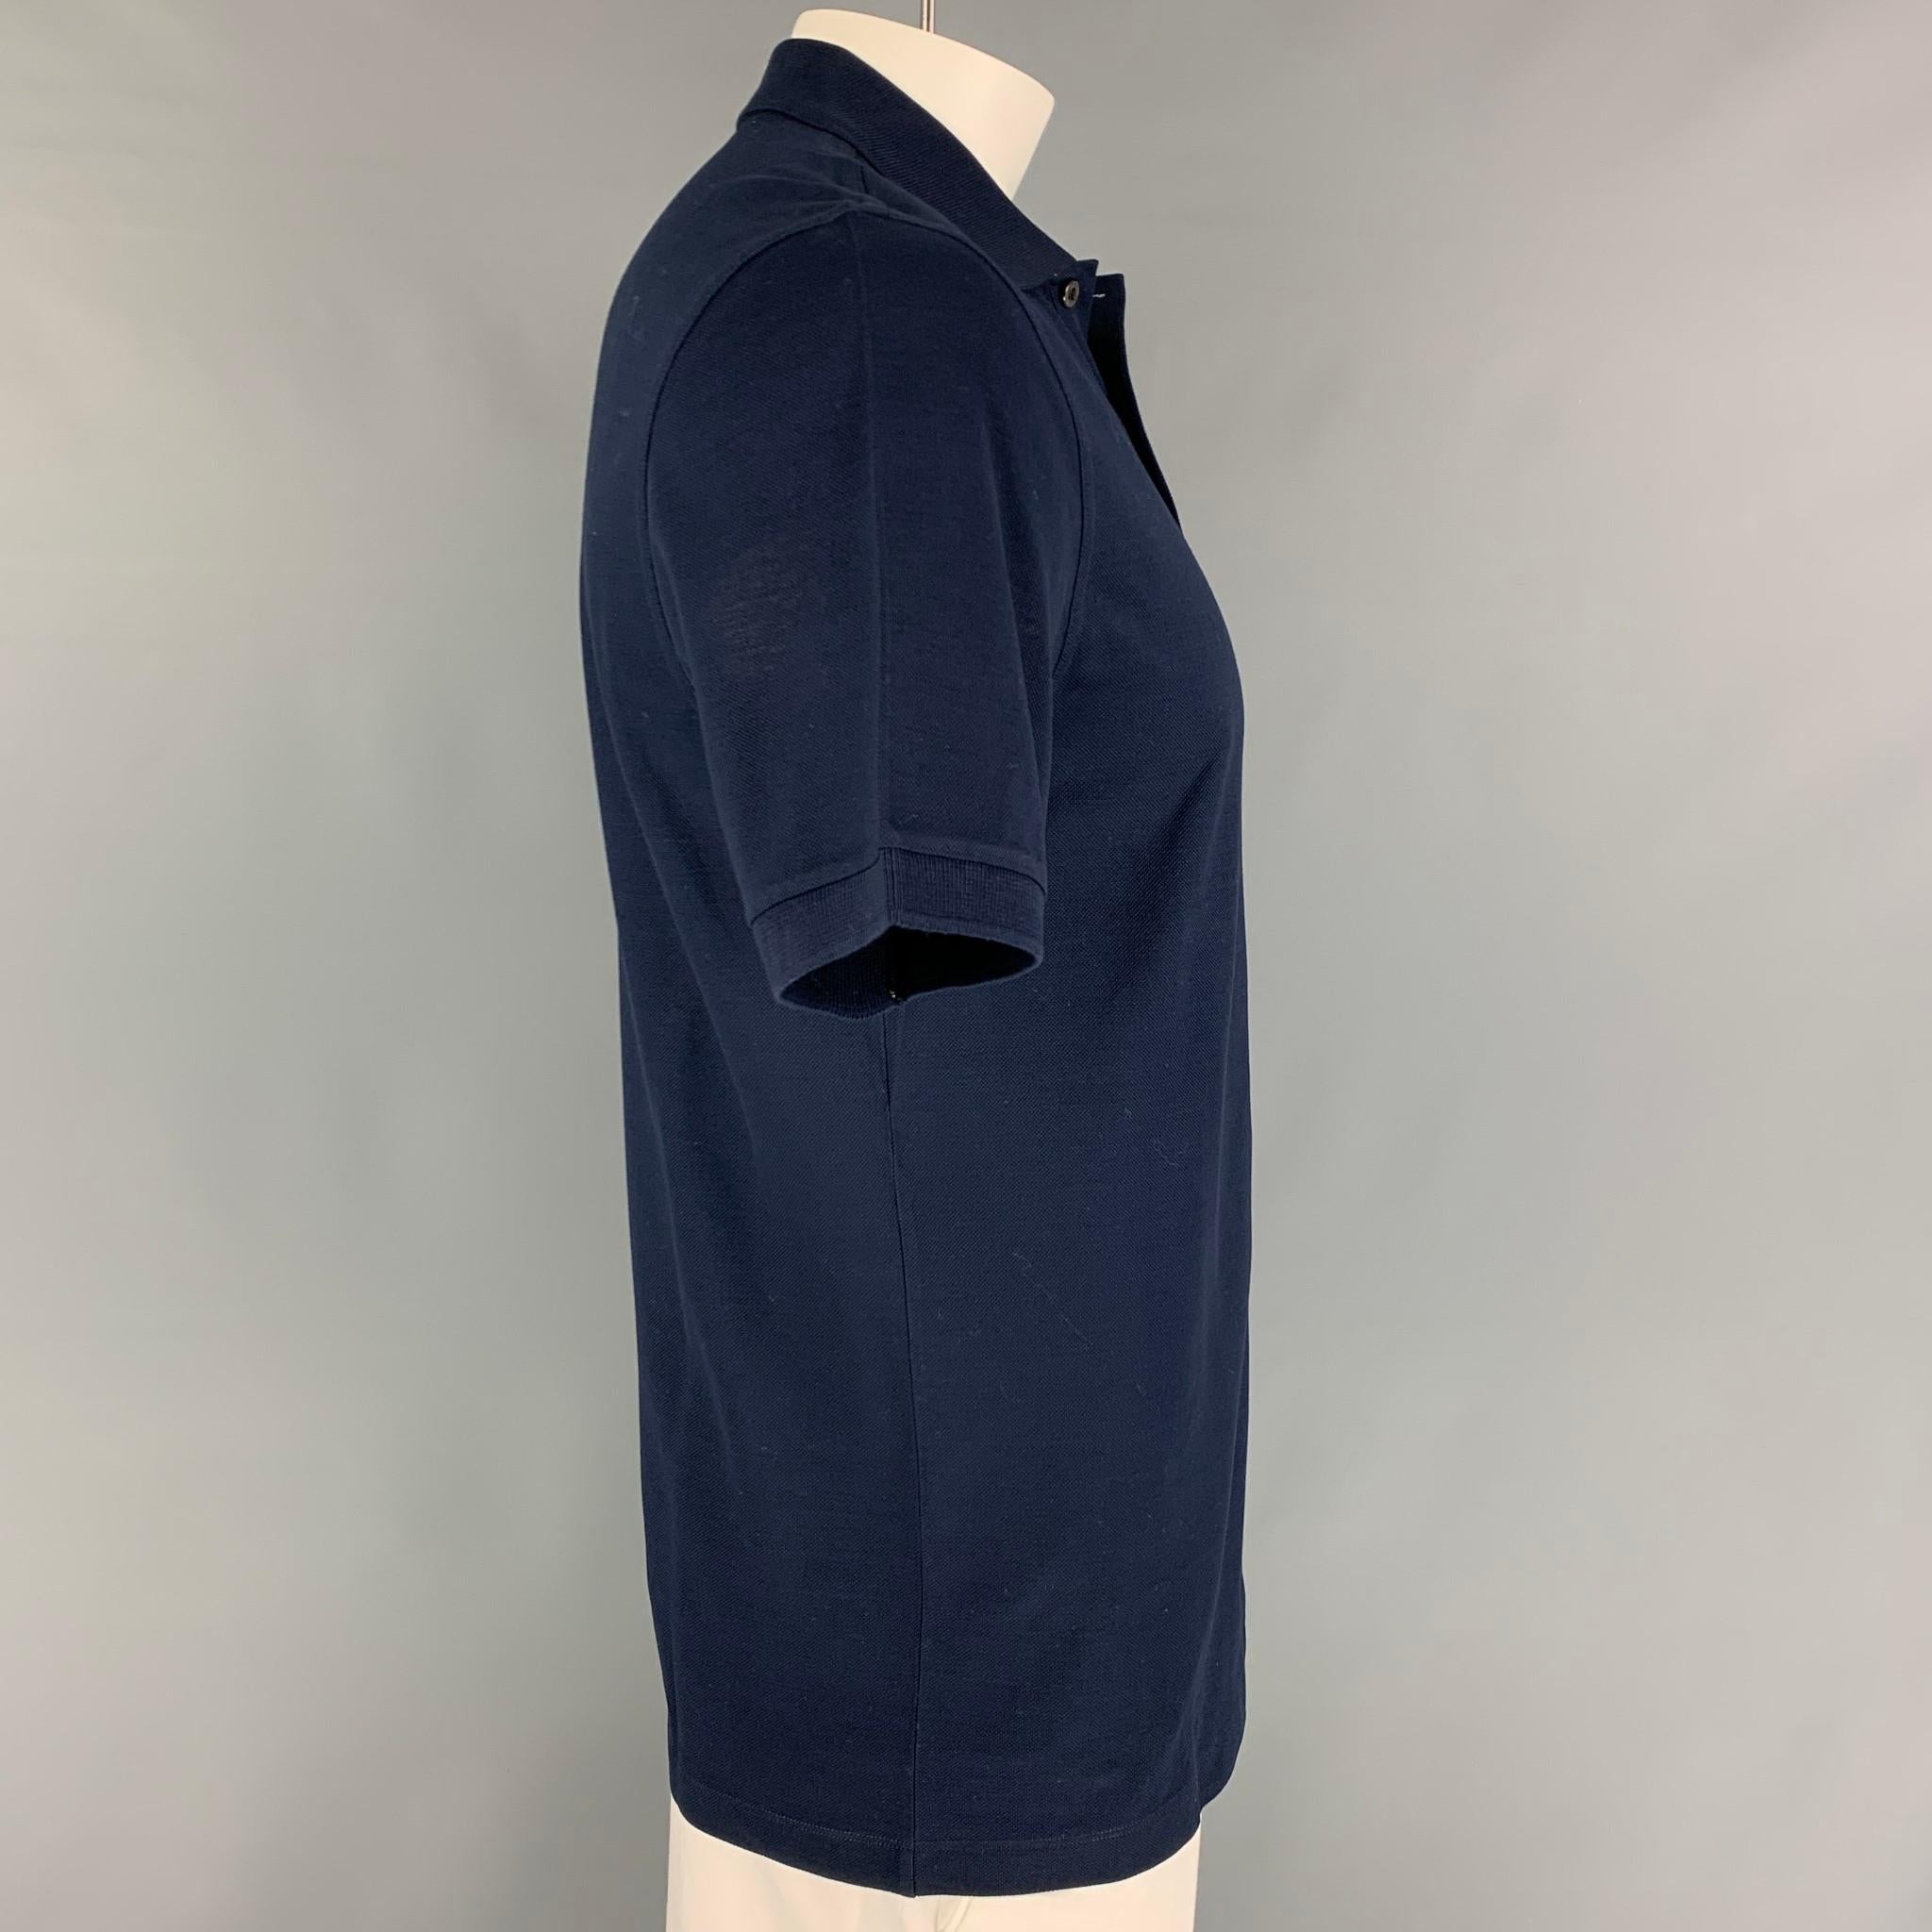 LOUIS VUITTON polo comes in a navy cotton featuring a embroidered logo, spread collar, and a half buttoned closure. Made in Italy. 

Excellent Pre-Owned Condition.
Marked: L

Measurements:

Shoulder: 18 in.
Chest: 40 in.
Sleeve: 10 in.
Length: 28